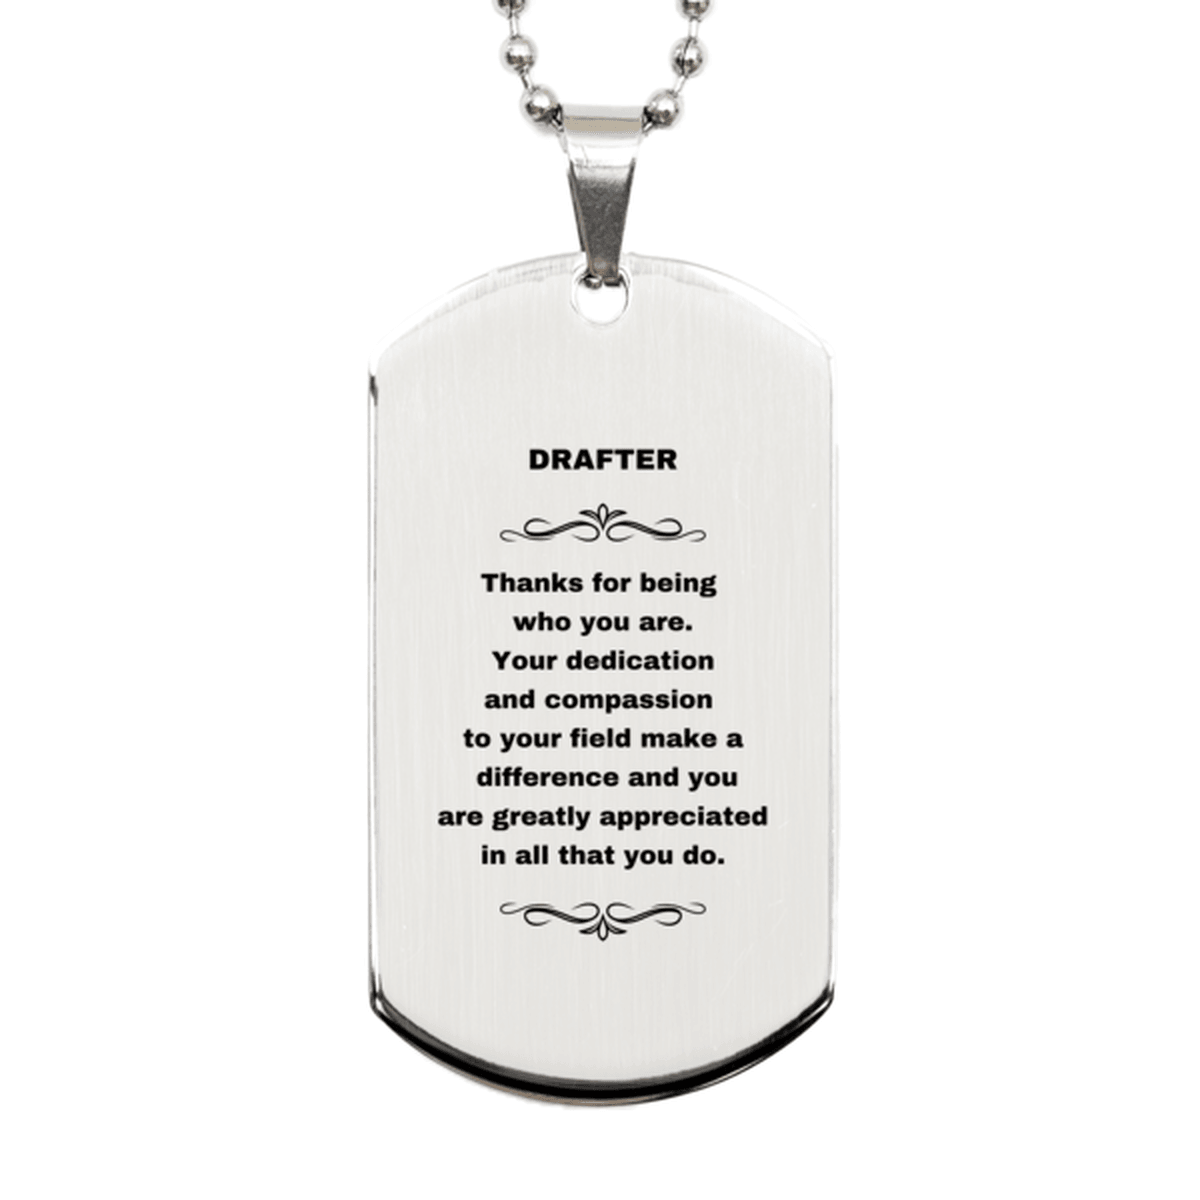 Drafter Silver Dog Tag Necklace Engraved Bracelet - Thanks for being who you are - Birthday Christmas Jewelry Gifts Coworkers Colleague Boss - Mallard Moon Gift Shop